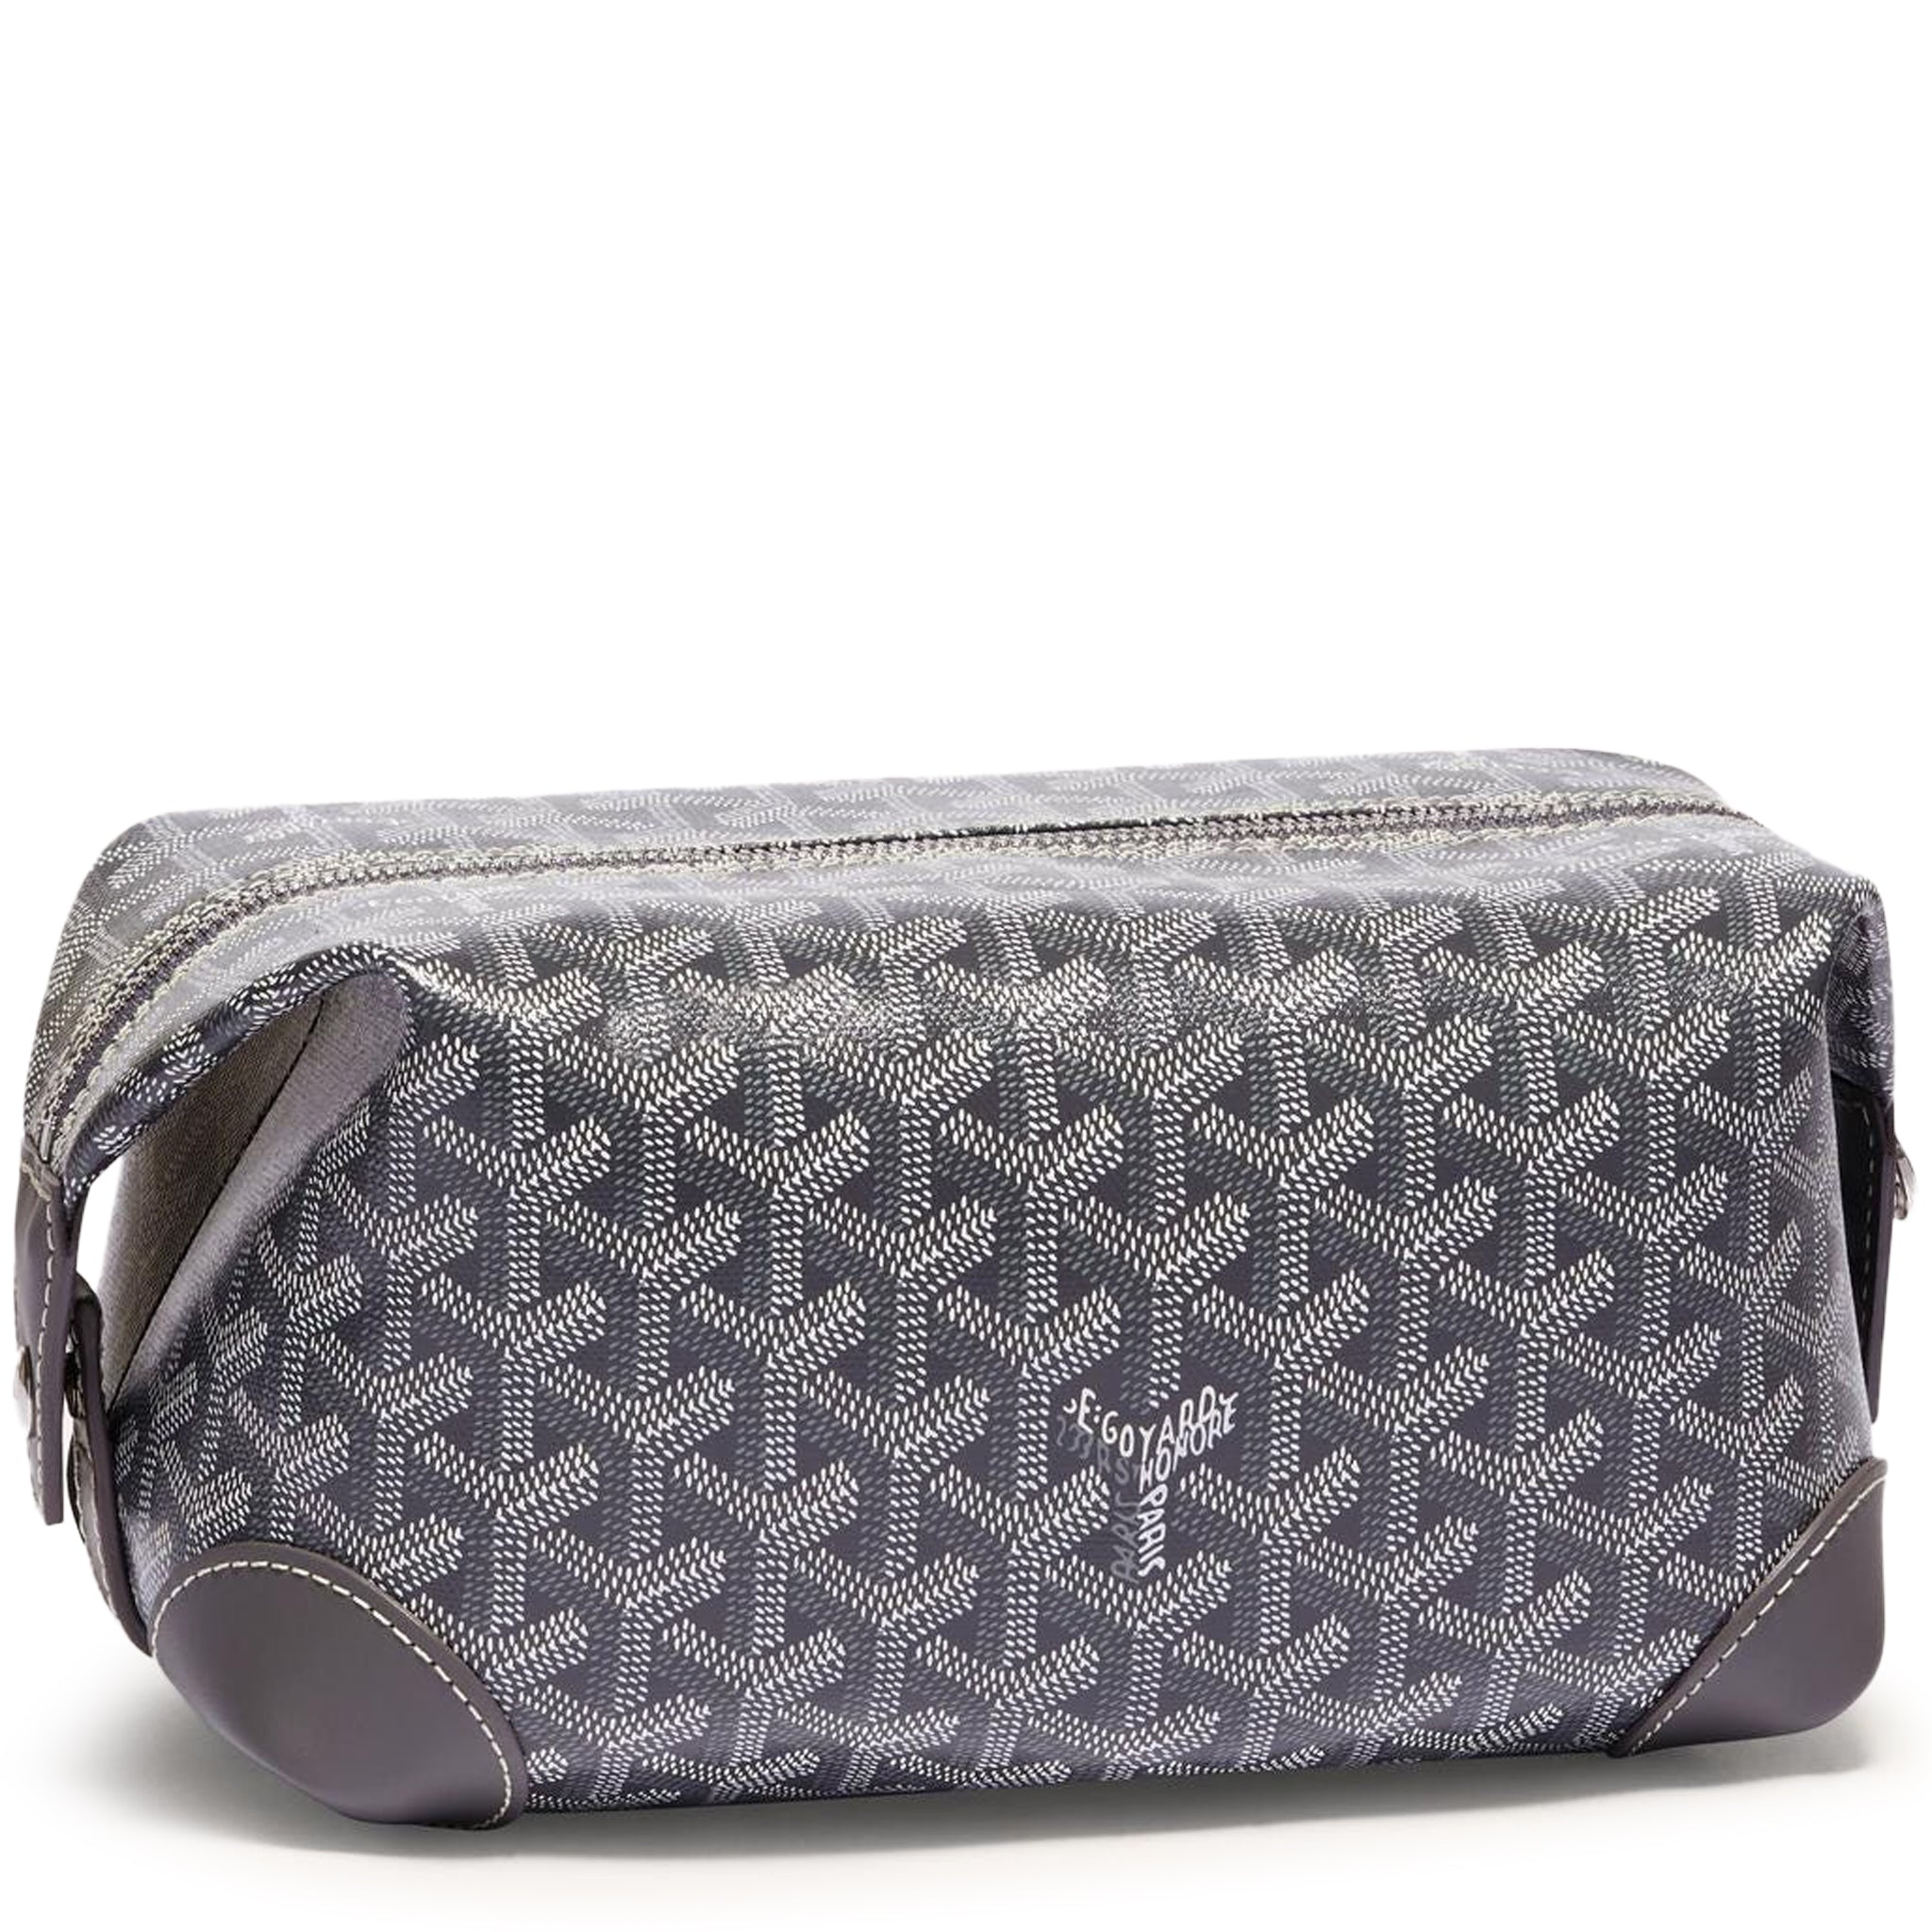 GOYARD JOUVENCE TOILETRY REVIEW  is it better than the LV toiletry 26 